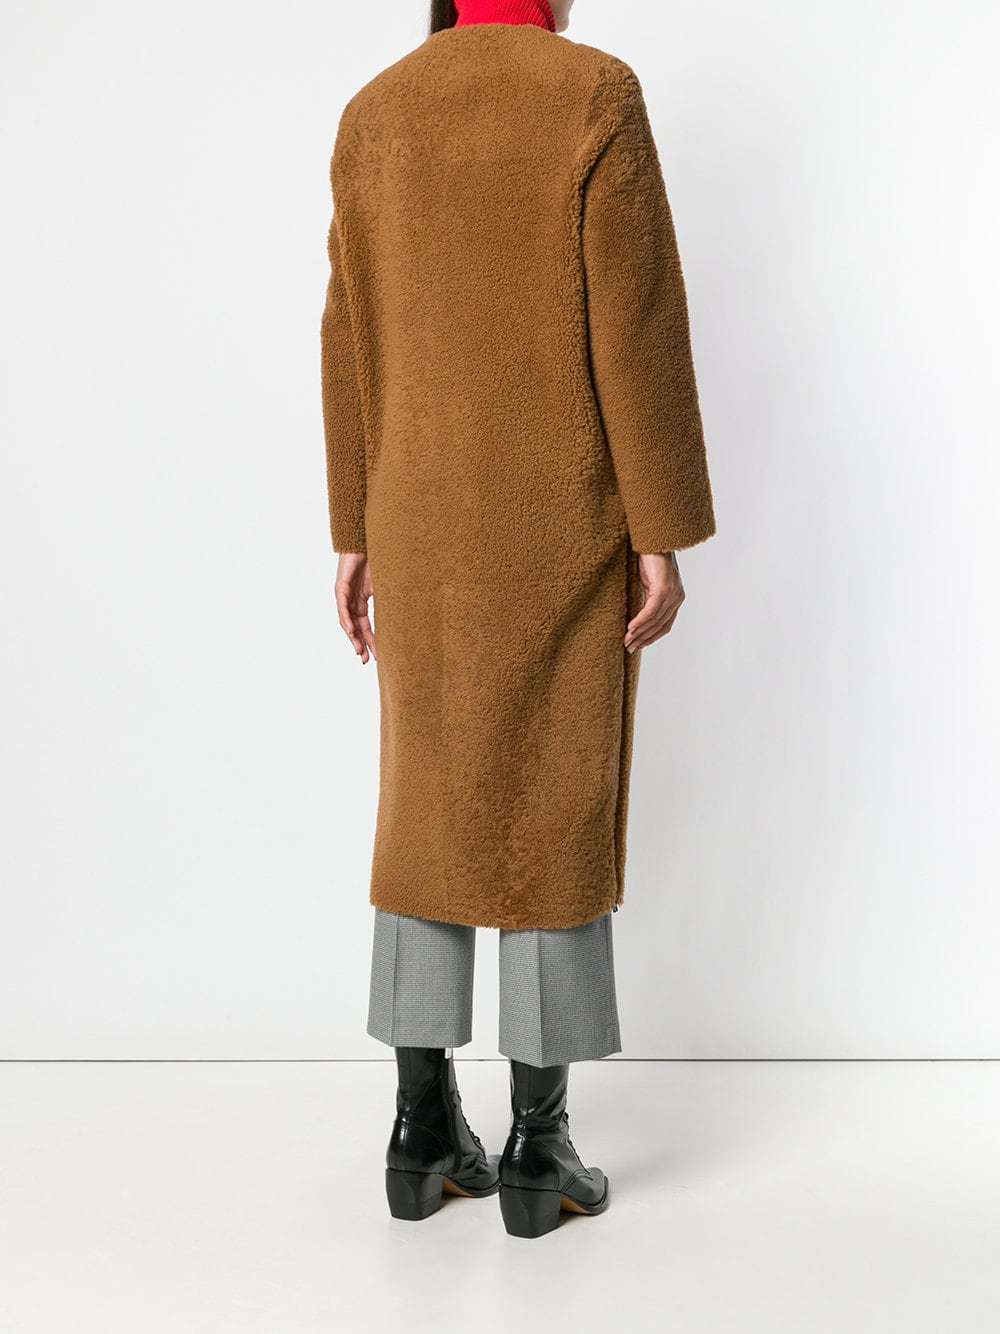 Inès & Marèchal Ins Marchal Single Breasted Shearling Coat, $1,960 ...